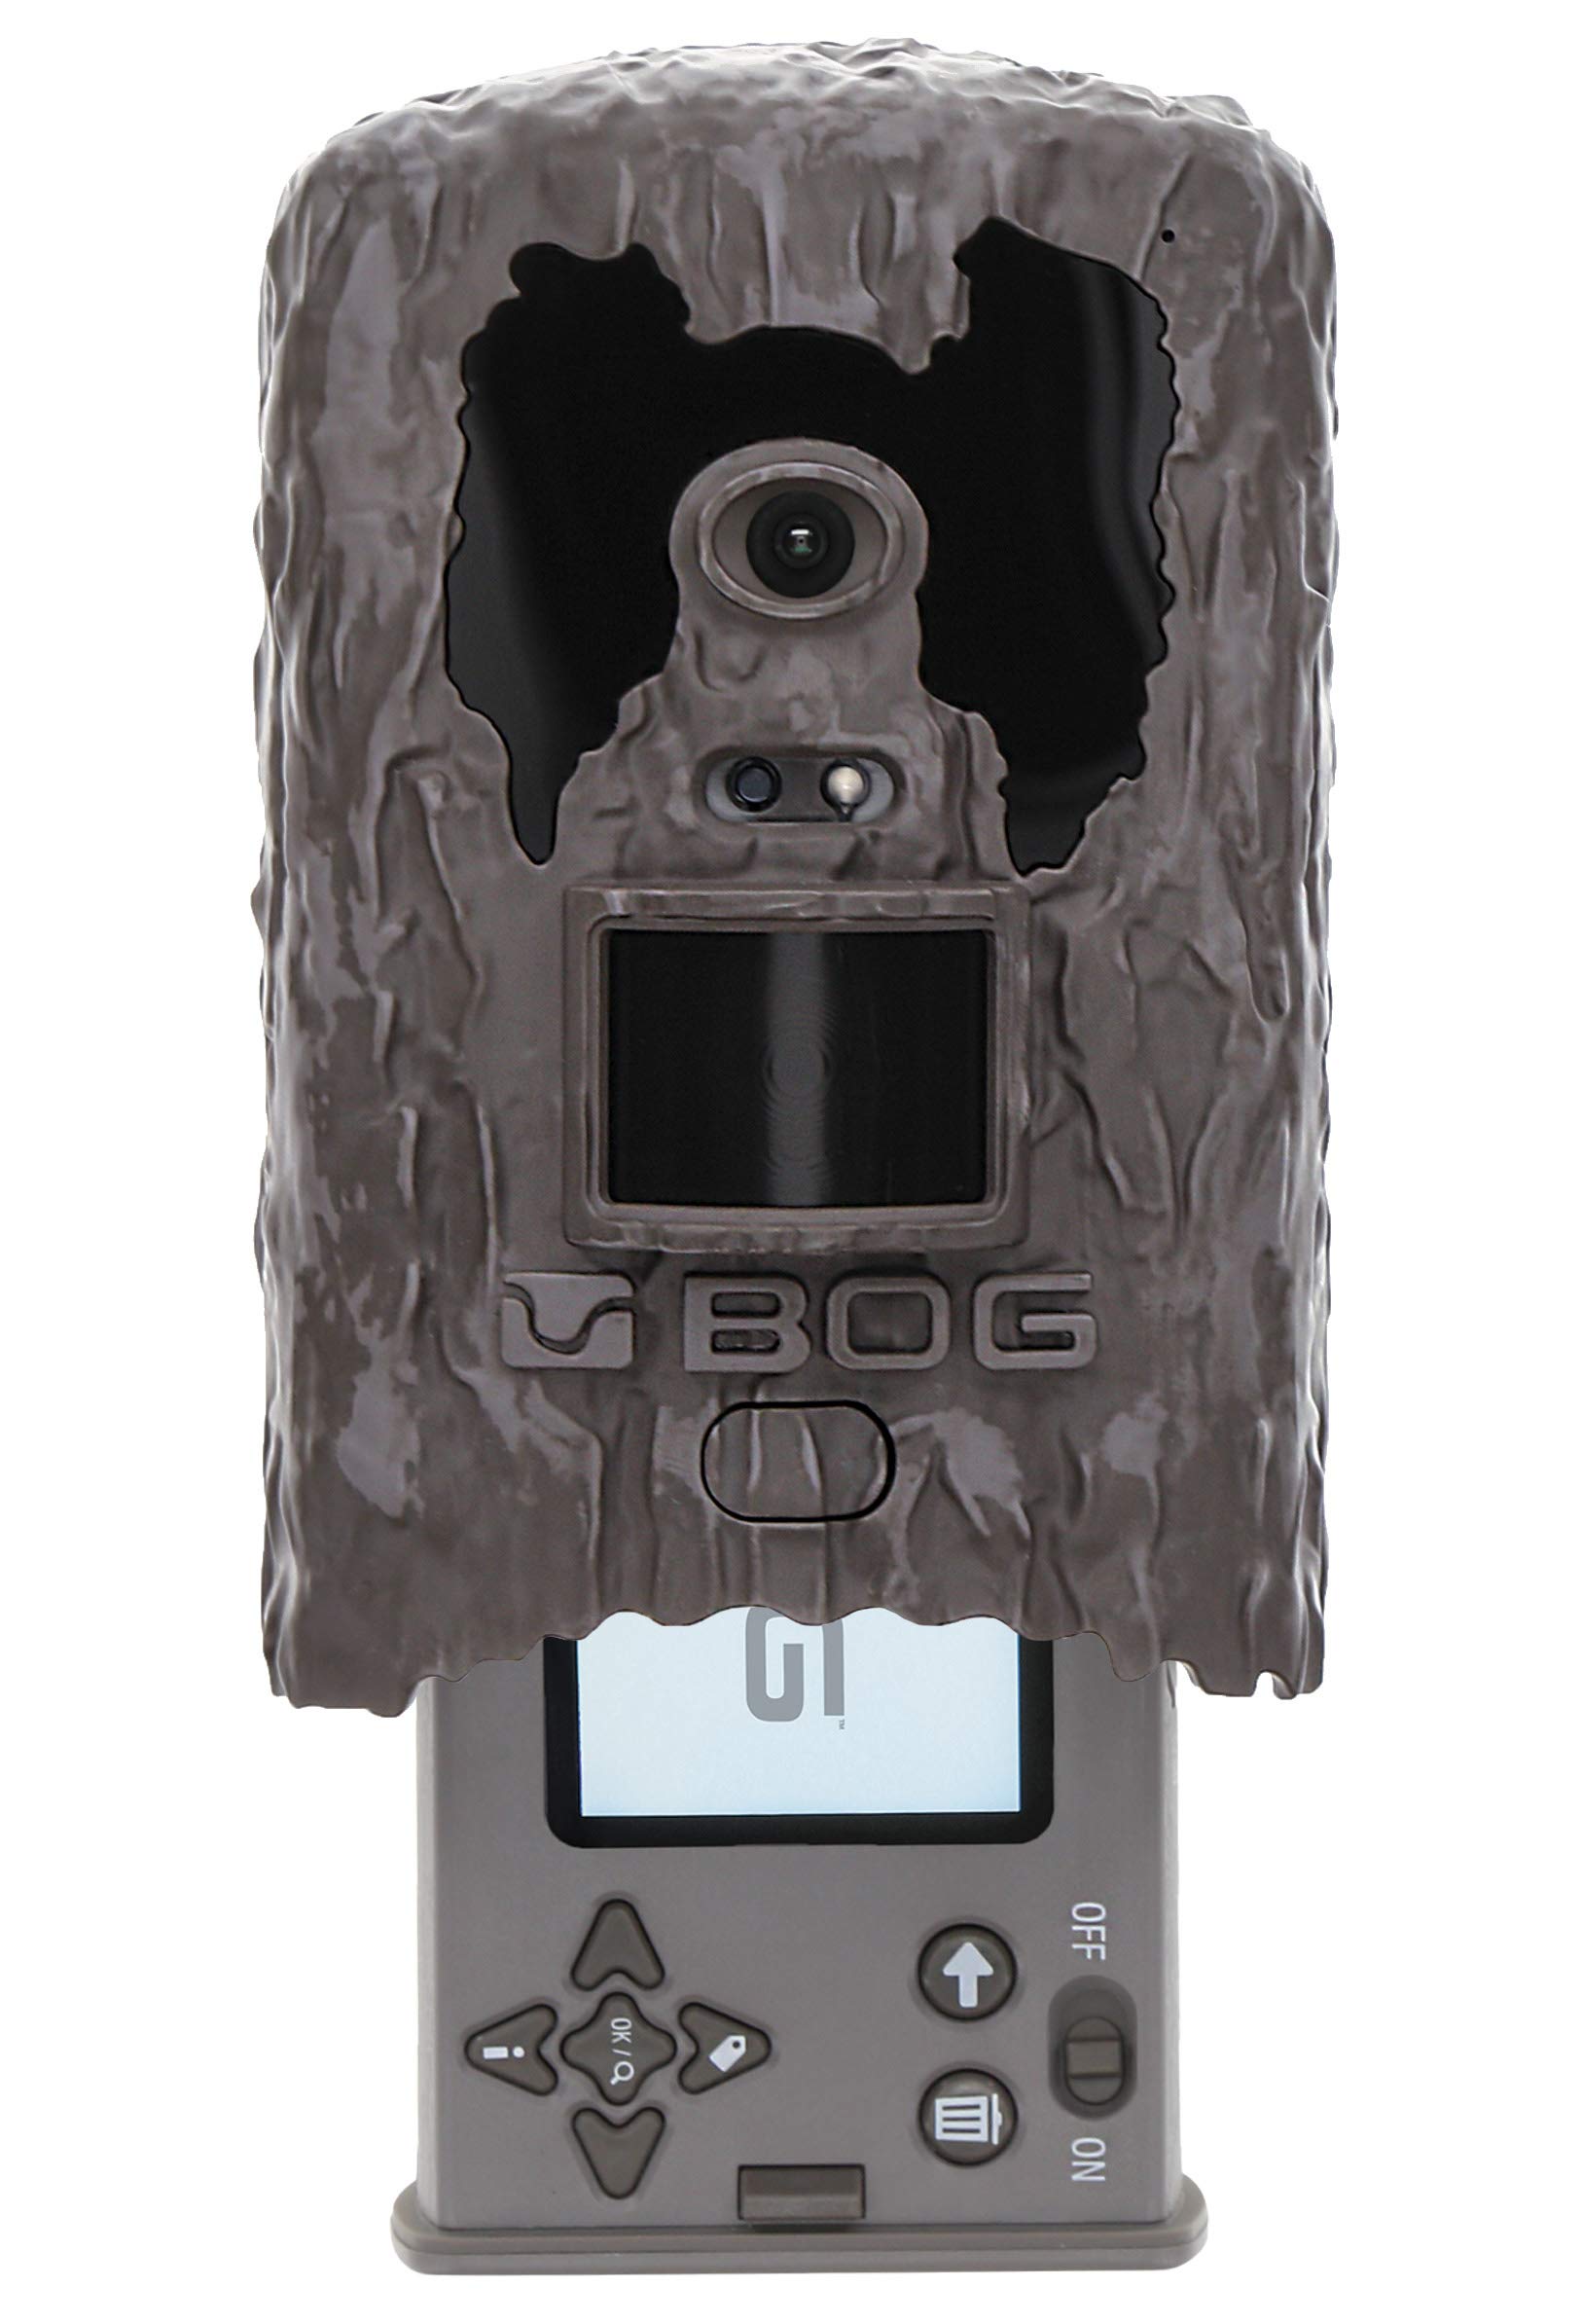 BOG Clandestine Invisible Flash 18MP Game Camera with Removable Viewing Screen, Low Glow Image Tagging, Tree Attachment, and HD Video for Hunting, Trapping, Land Management, Security, and Outdoors